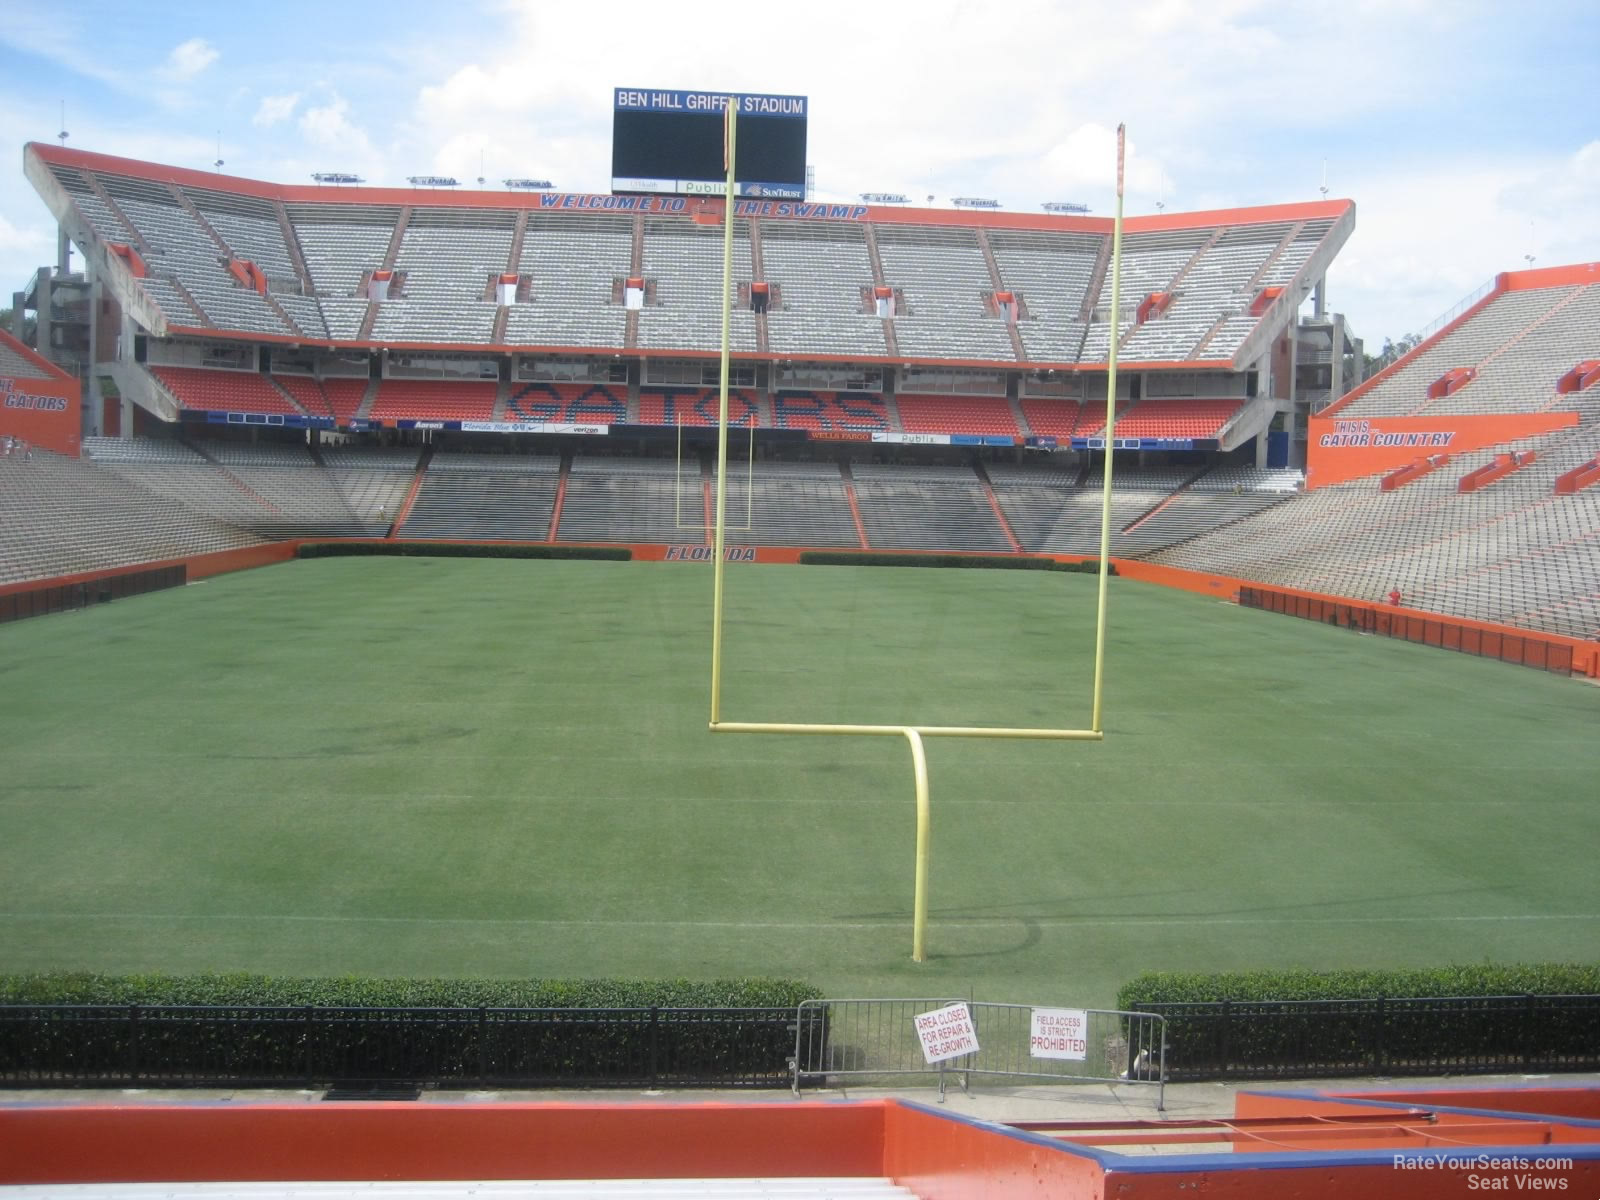 section e, row 23 seat view  - ben hill griffin stadium